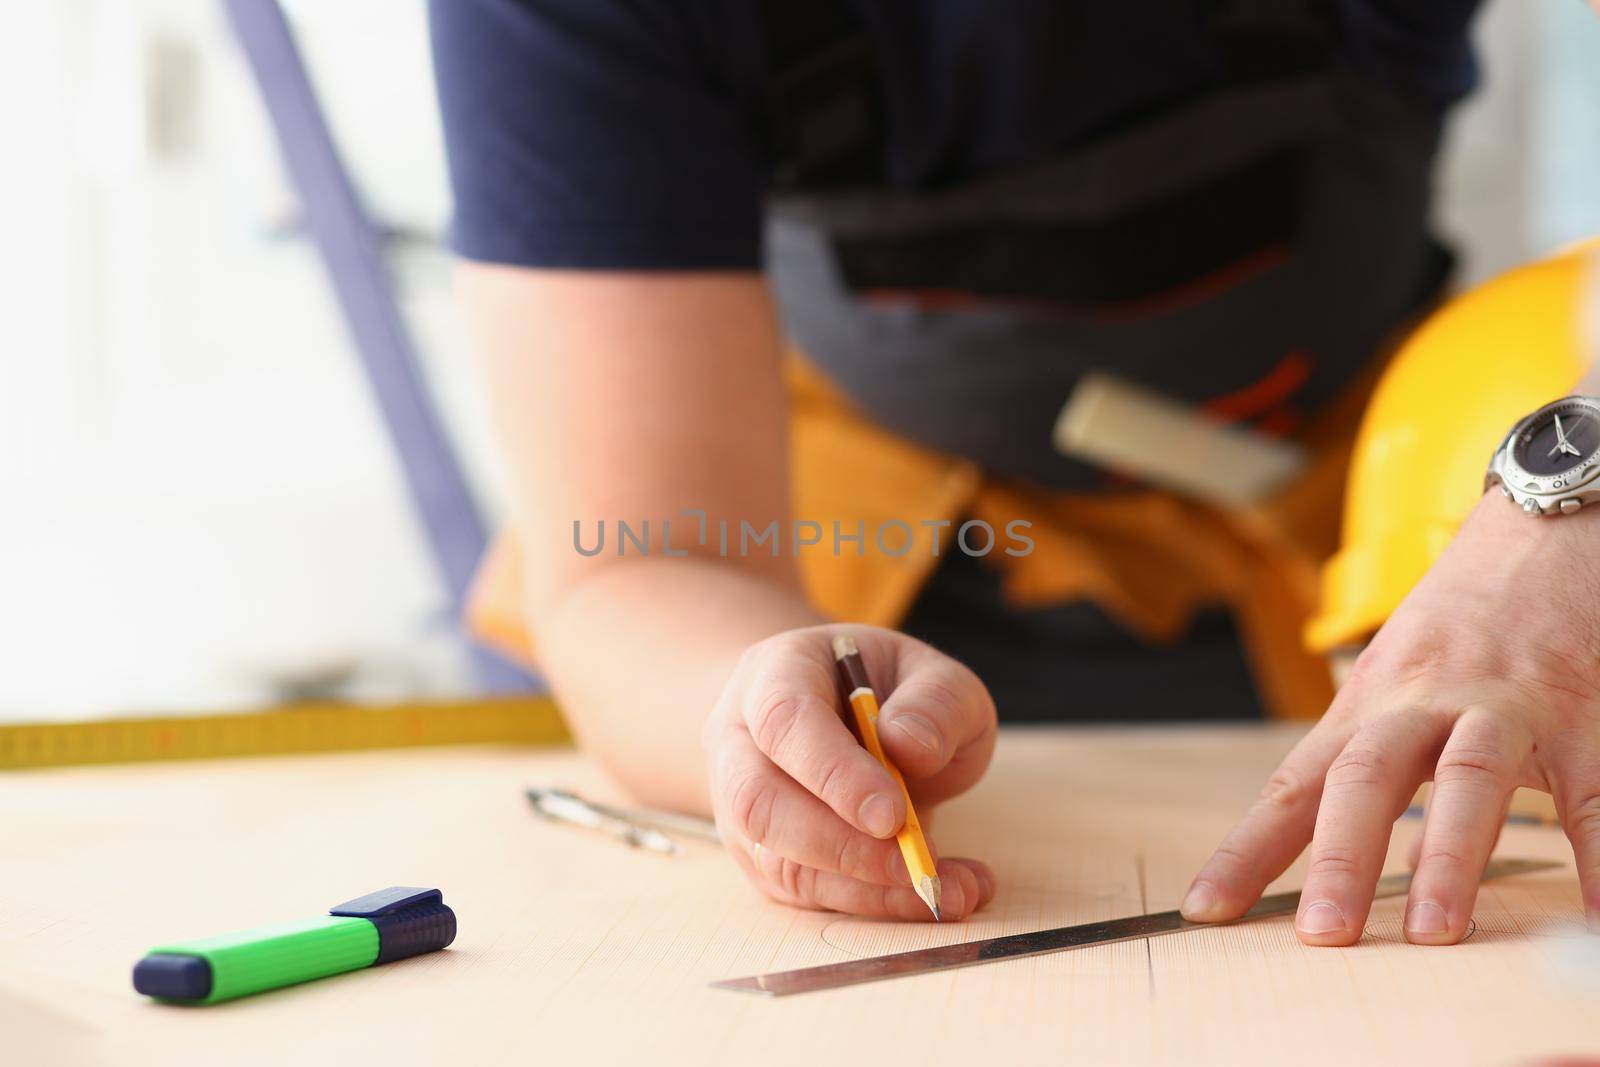 Arms of worker making structure plan on scaled paper closeup. Manual job DIY inspiration improvement job fix shop graphic joinery startup workplace idea designer career industrial education